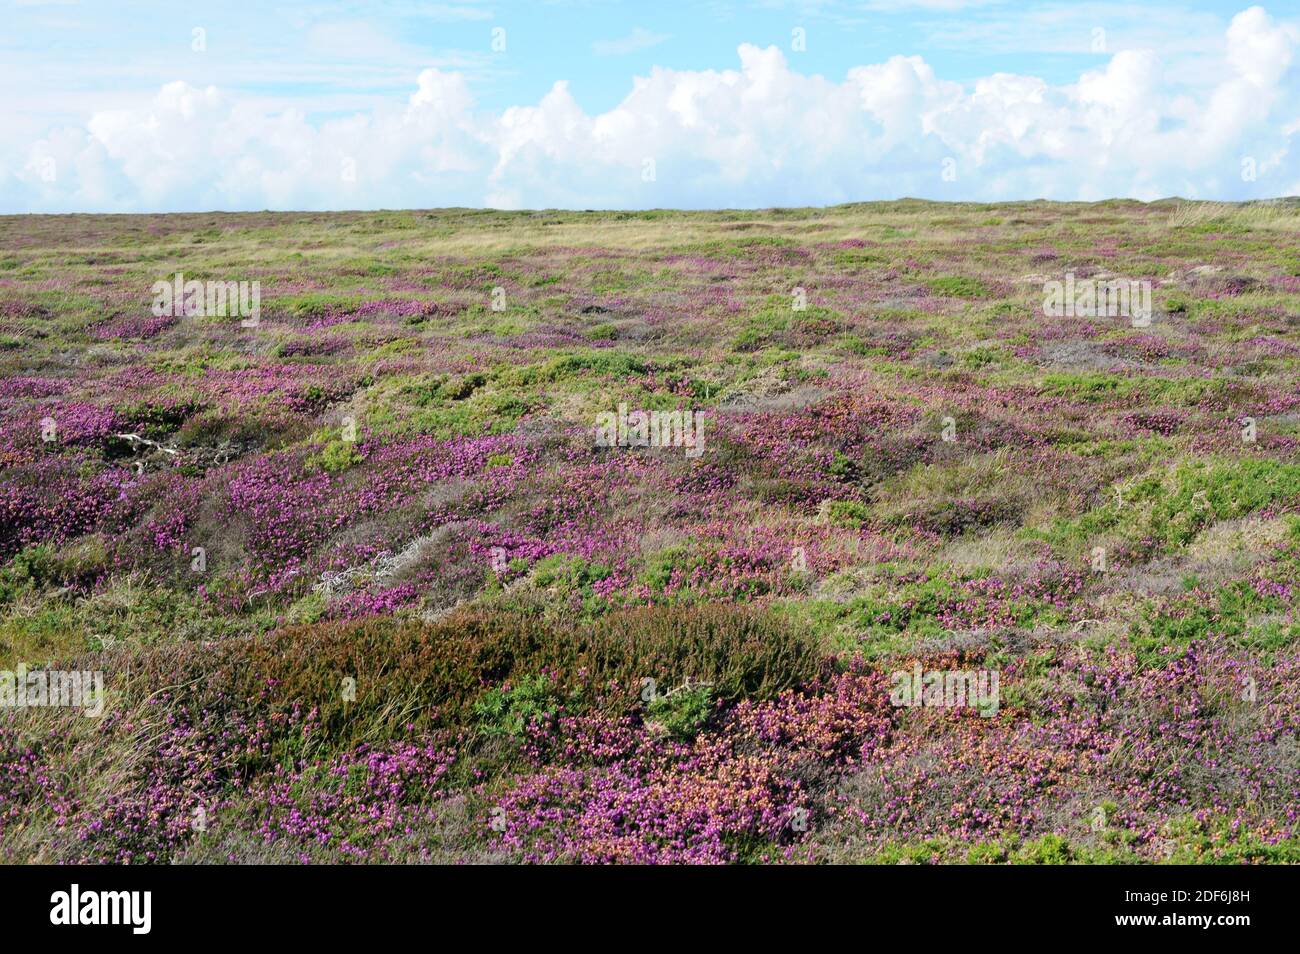 Bell heather (Erica cinerea) is a shrub native to western Europe from Spain to Norway. This photo was taken in Losmarchs, Brittany, France. Stock Photo